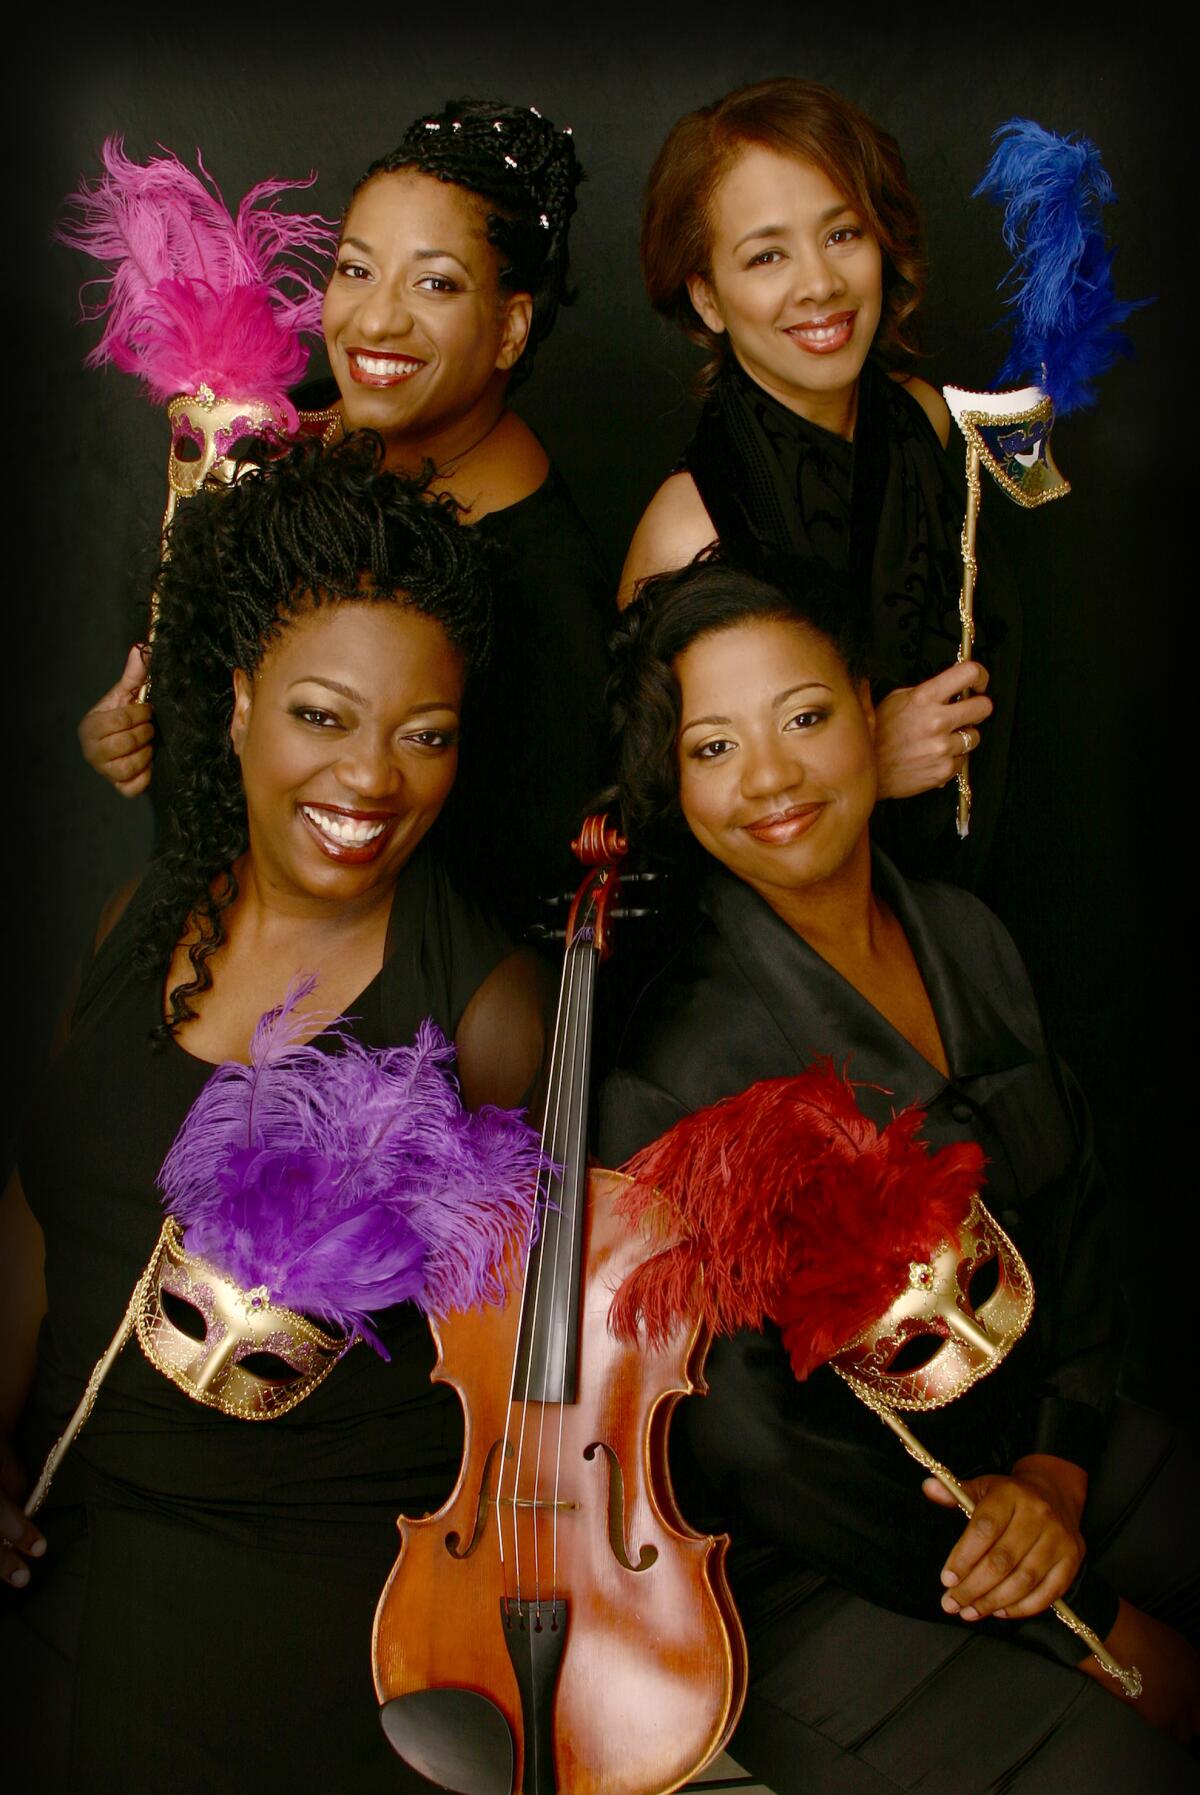 The Marion Anderson String Quartet will perform May 3 in Escondido.